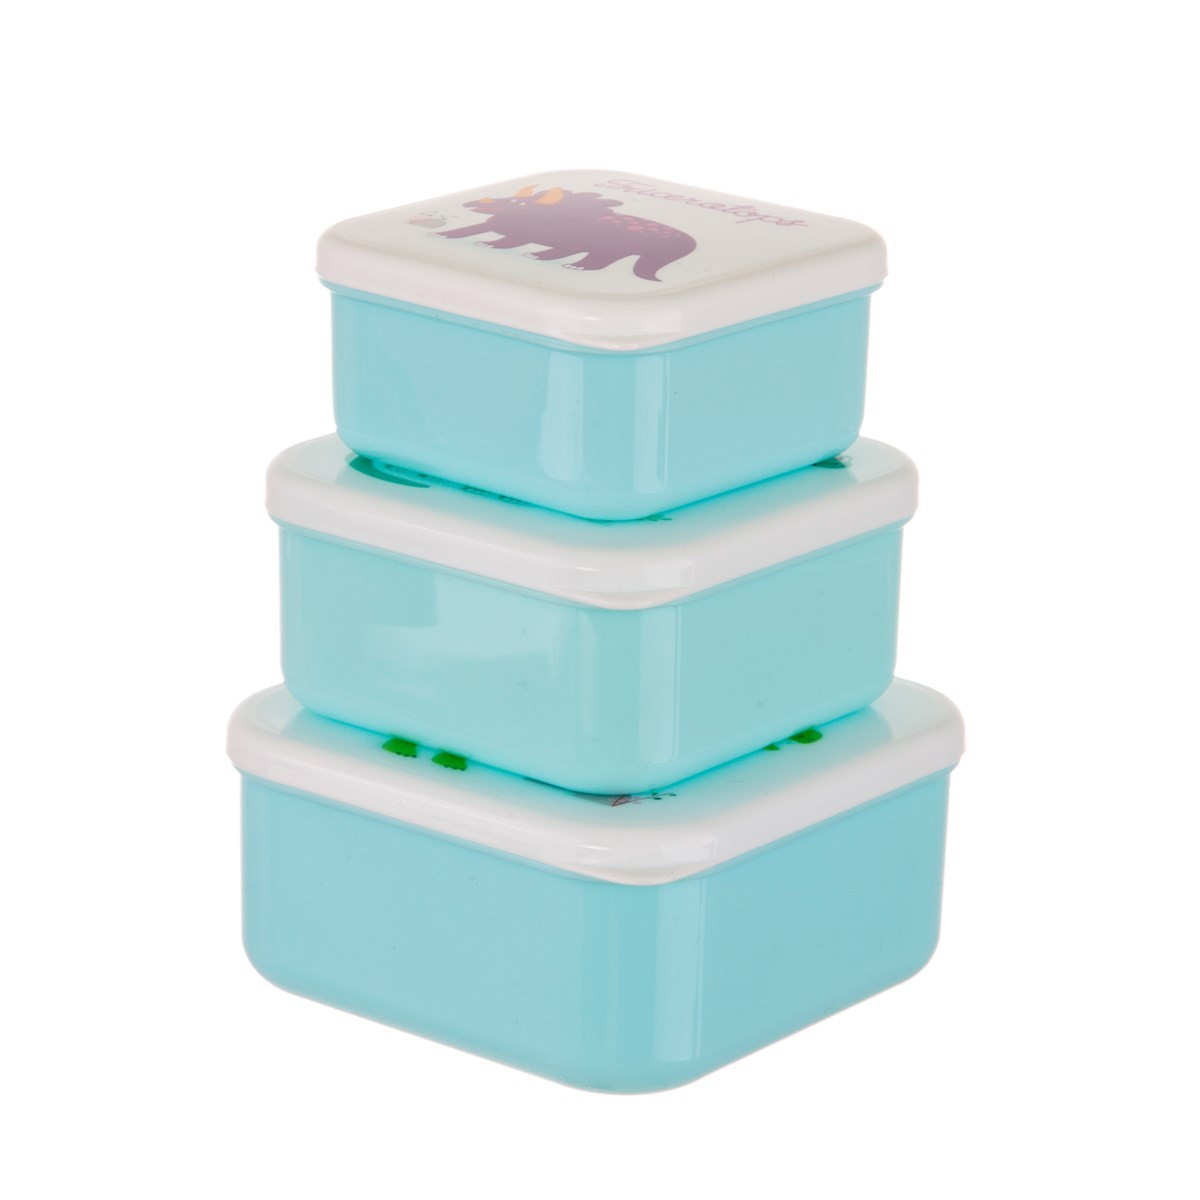 Sass & Belle Roarsome Dino Lunch Boxes, Blue - 3 Pack>